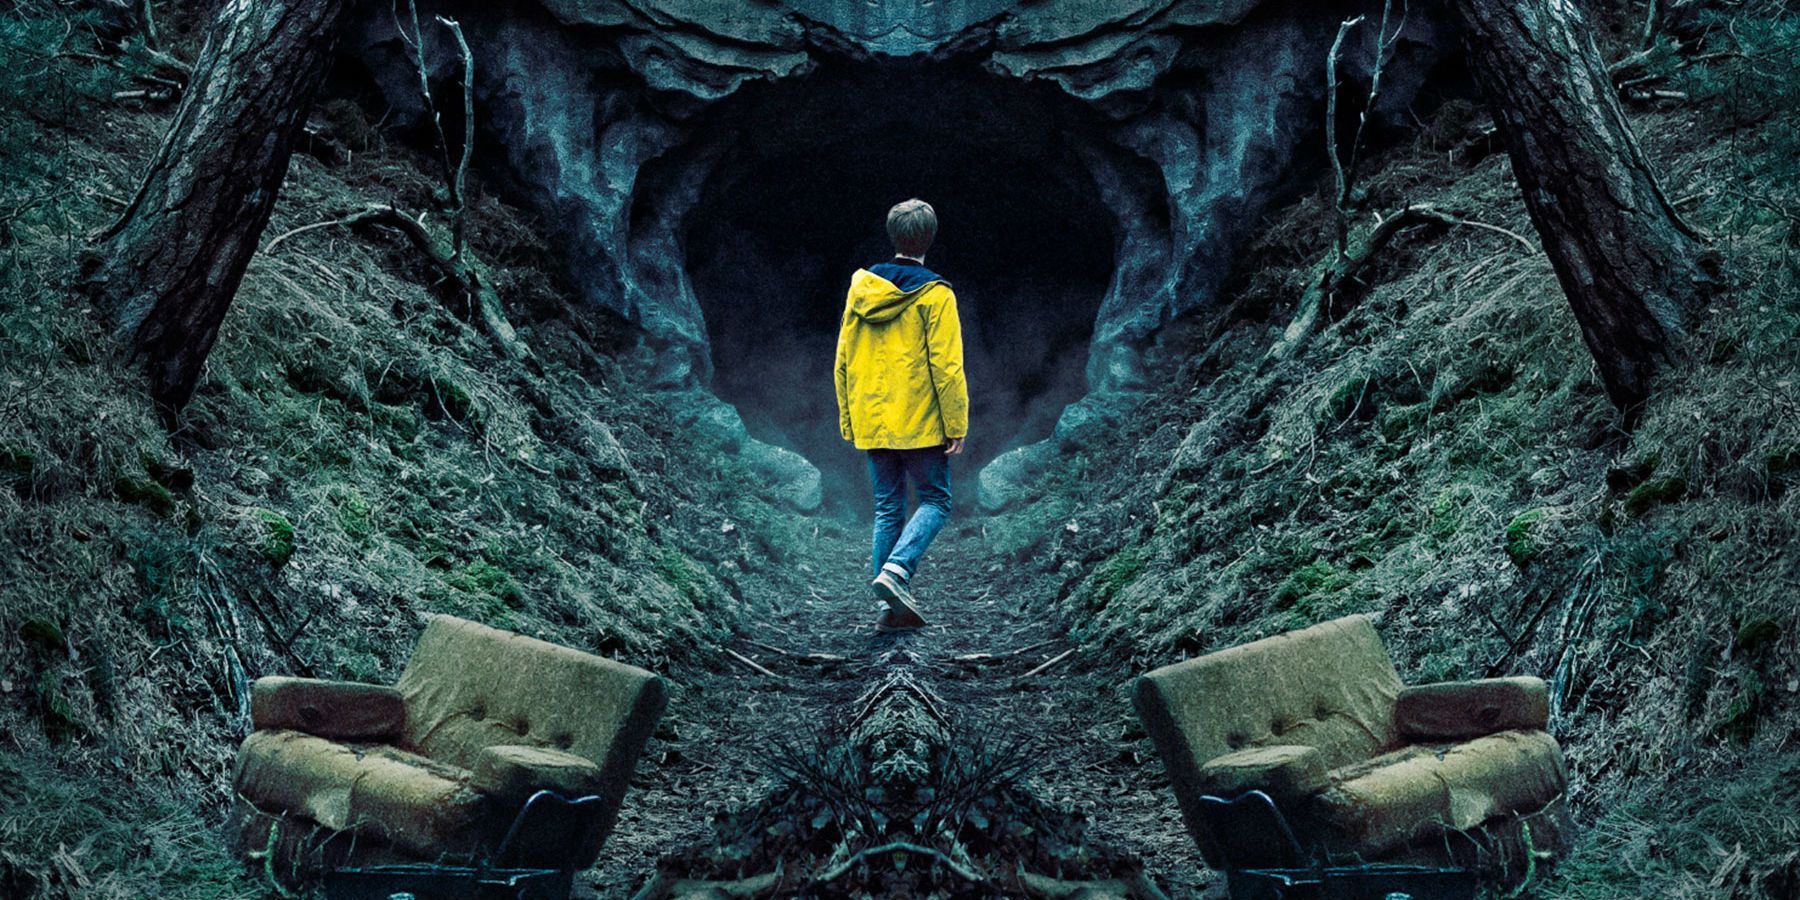 Jonas looks into a cave in a promotional image for Netflix's Dark